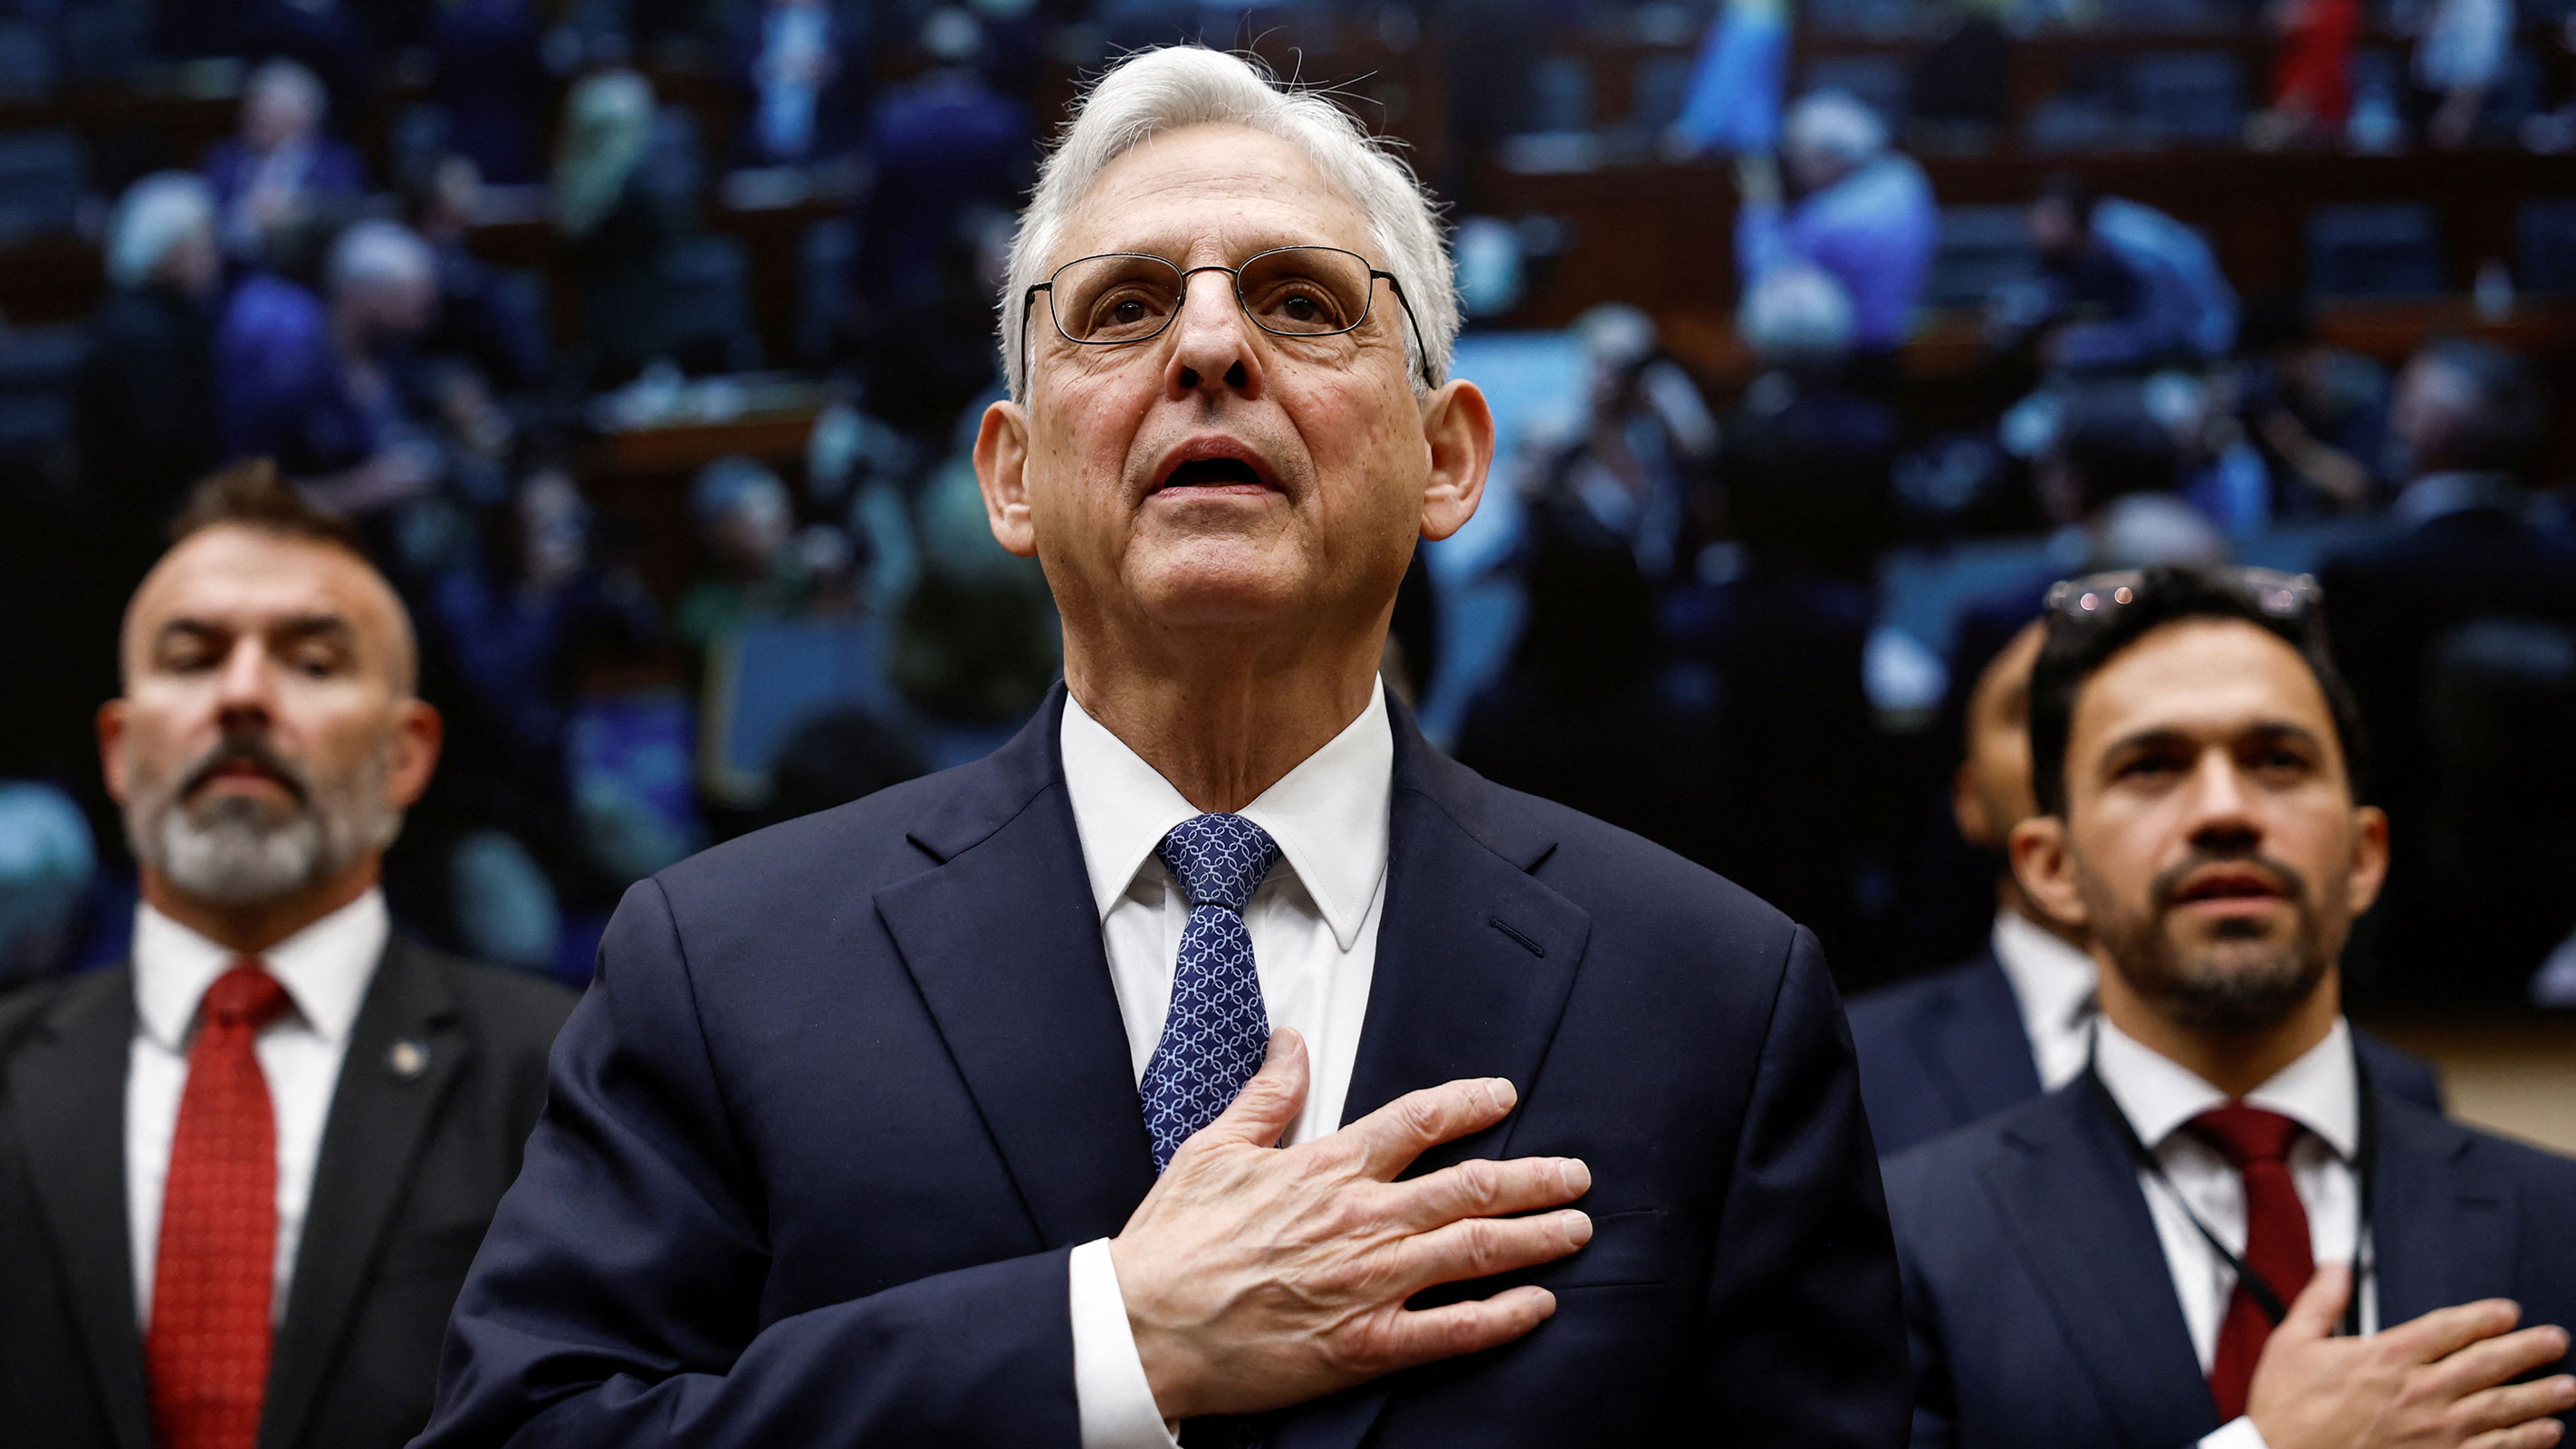 US Attorney General Merrick Garland stands for the Pledge of Allegiance prior to testifying before a House Judiciary Committee hearing on the "Oversight of the U.S. Department of Justice," on Capitol Hill in Washington, DC, on Wednesday.